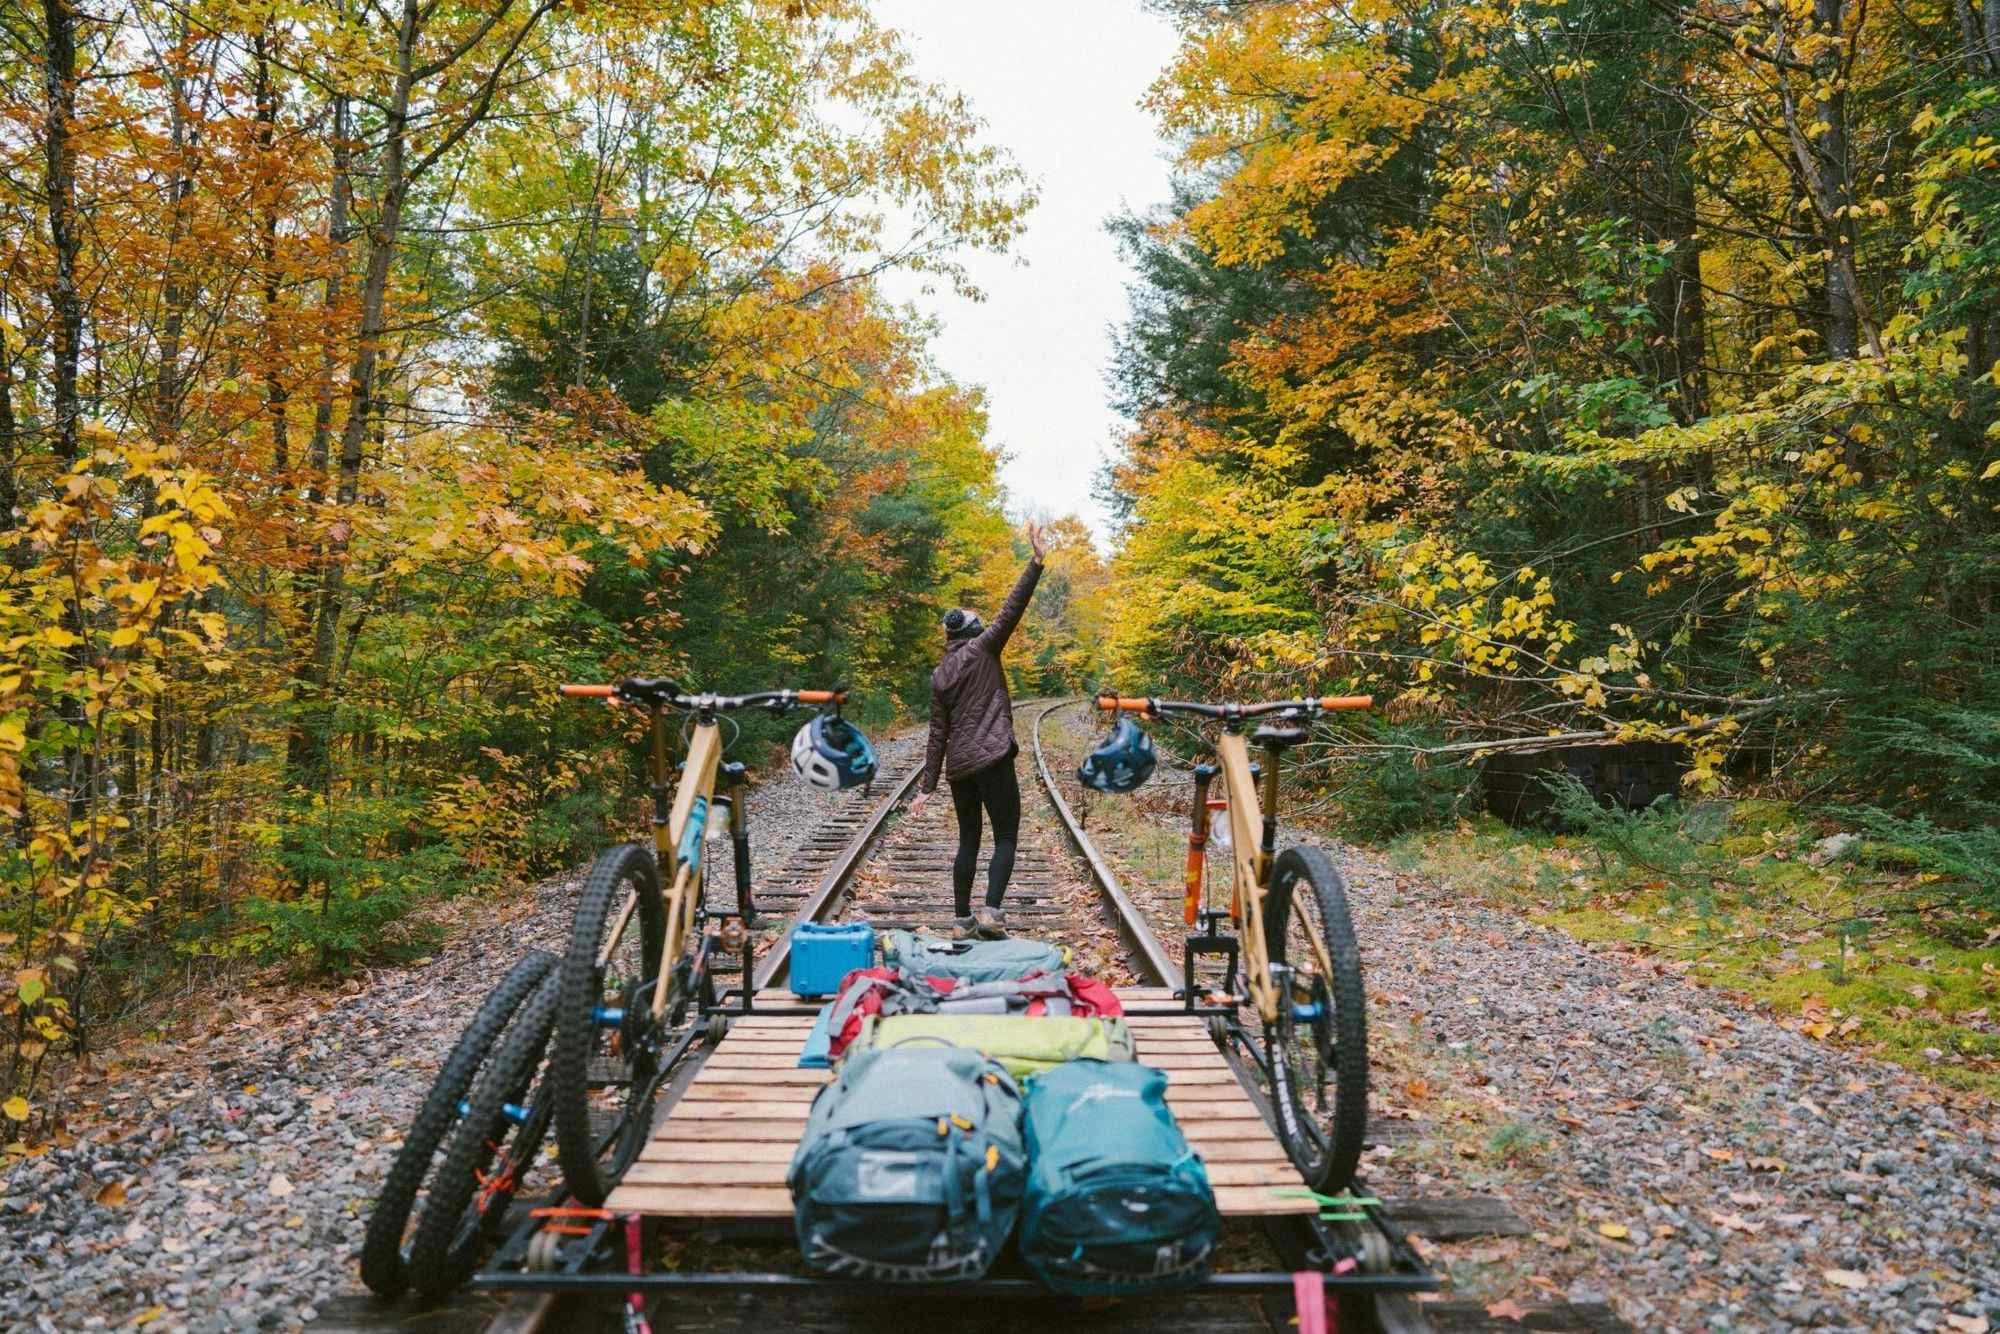 Lunchtime Cinema: Riding the Rails - a New Type of Mountain Biking